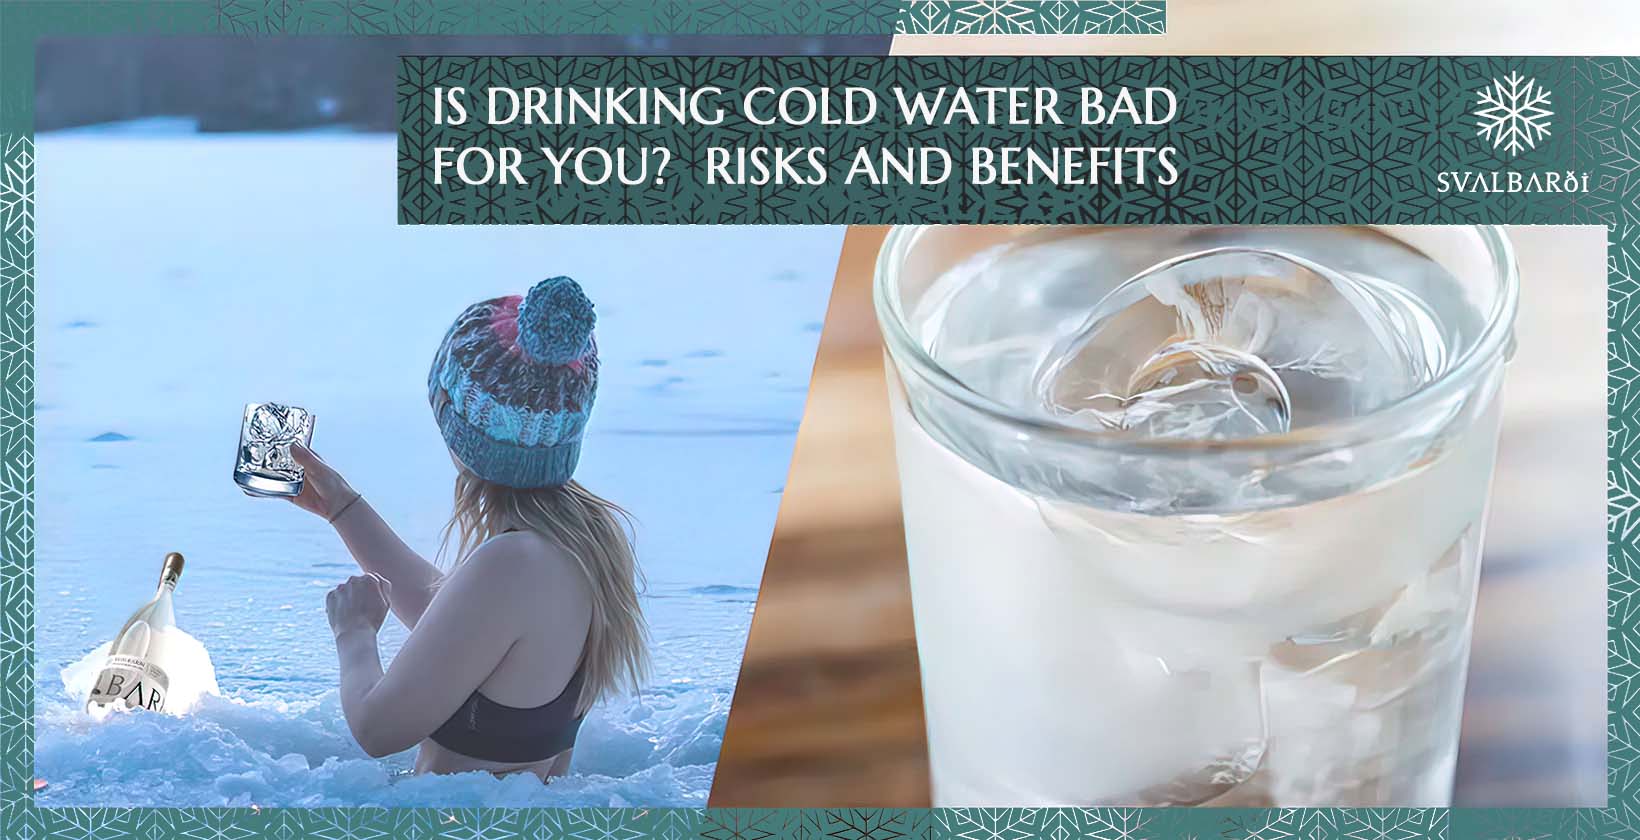 Benefits and Risks of Drinking Cold Water